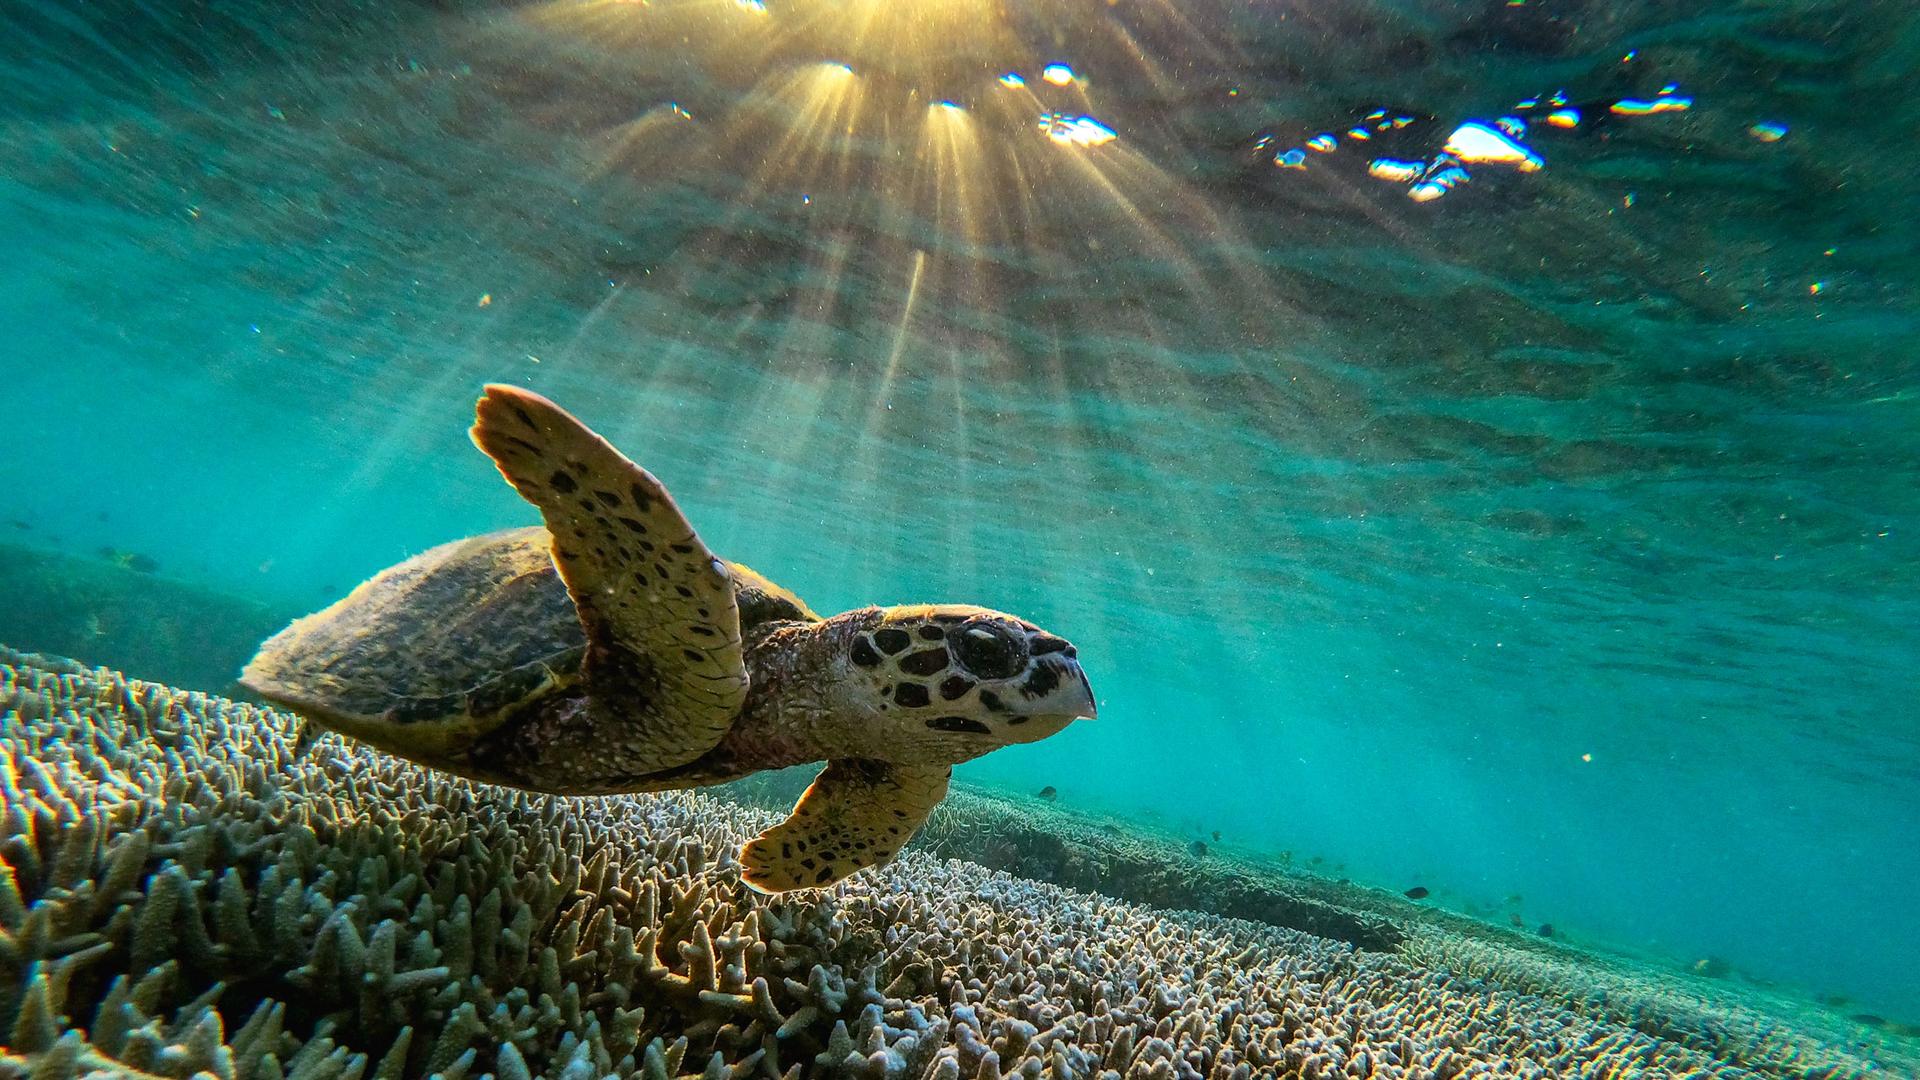 A large sea turtle is shown swimming just above the coral reef in a photograph taken from below the animal and the light of the sun above.